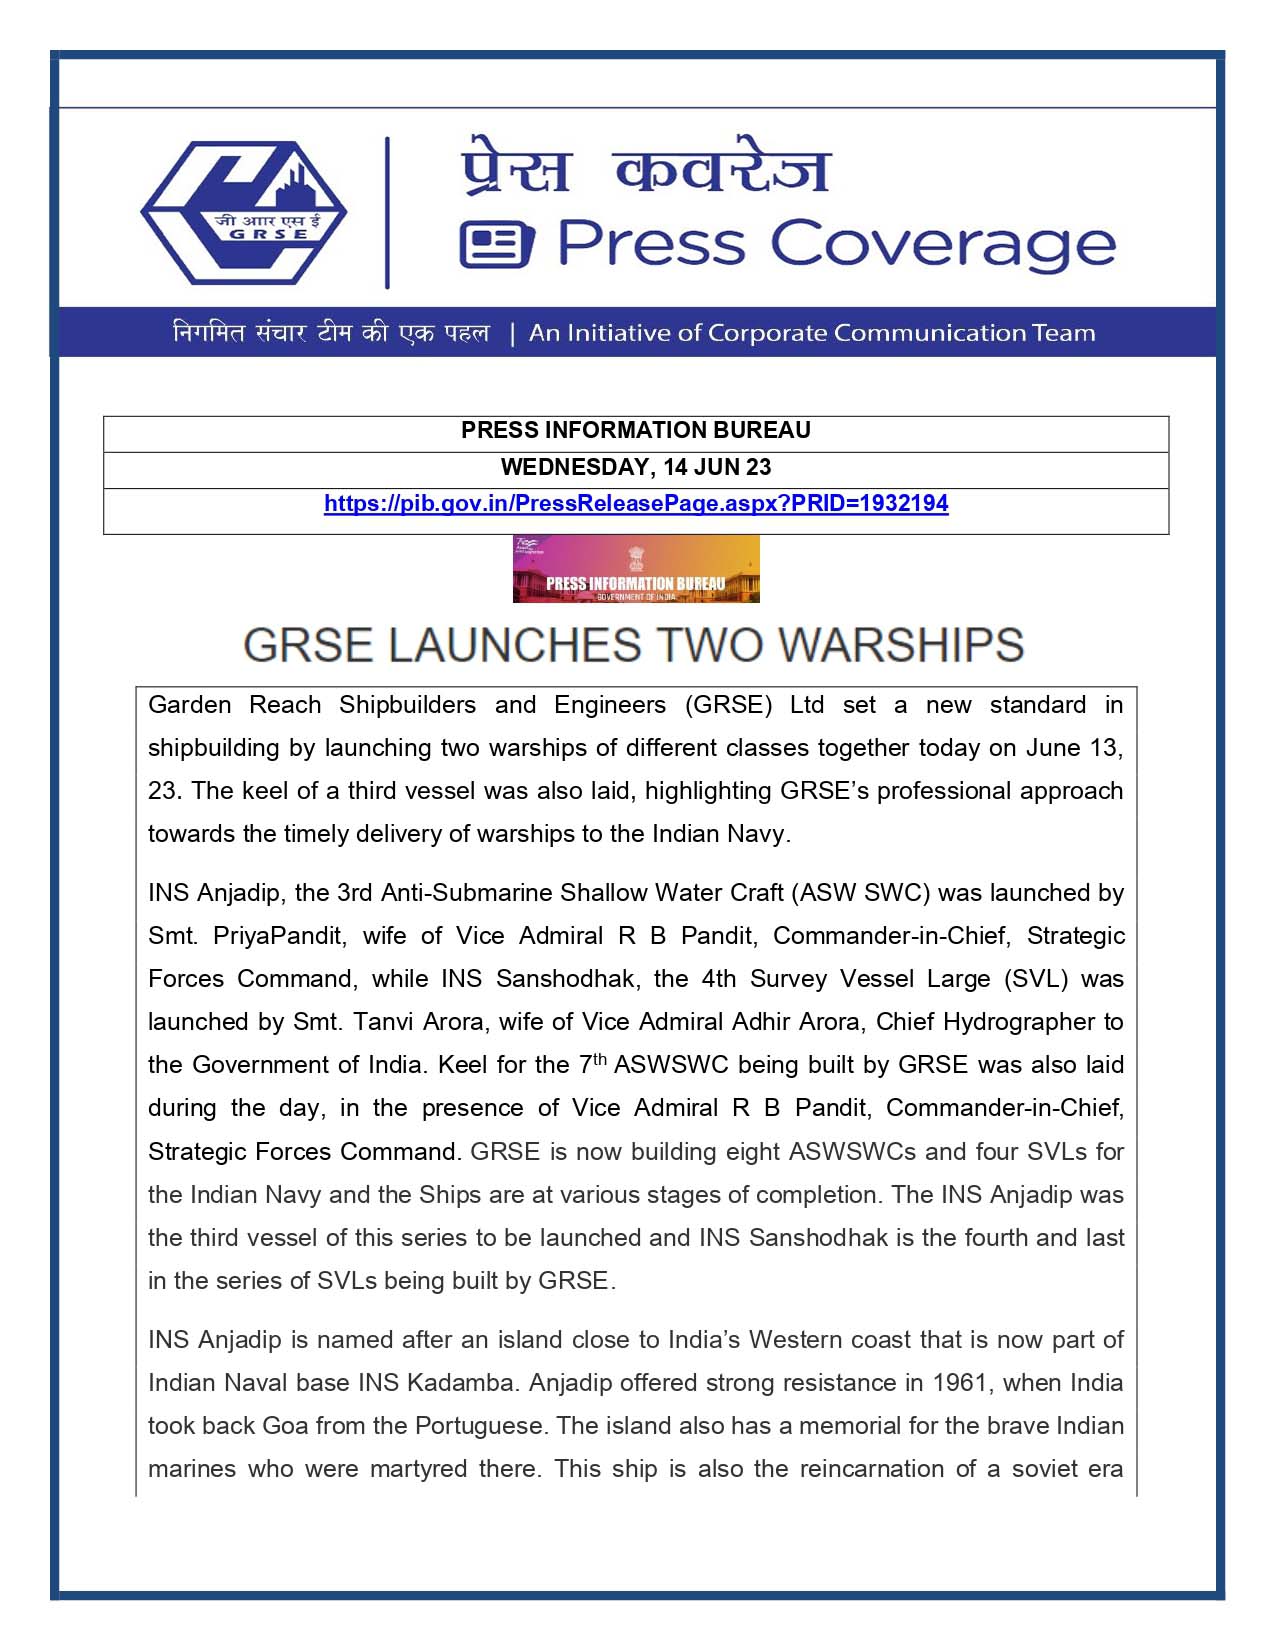 GRSE Launches Two Warships